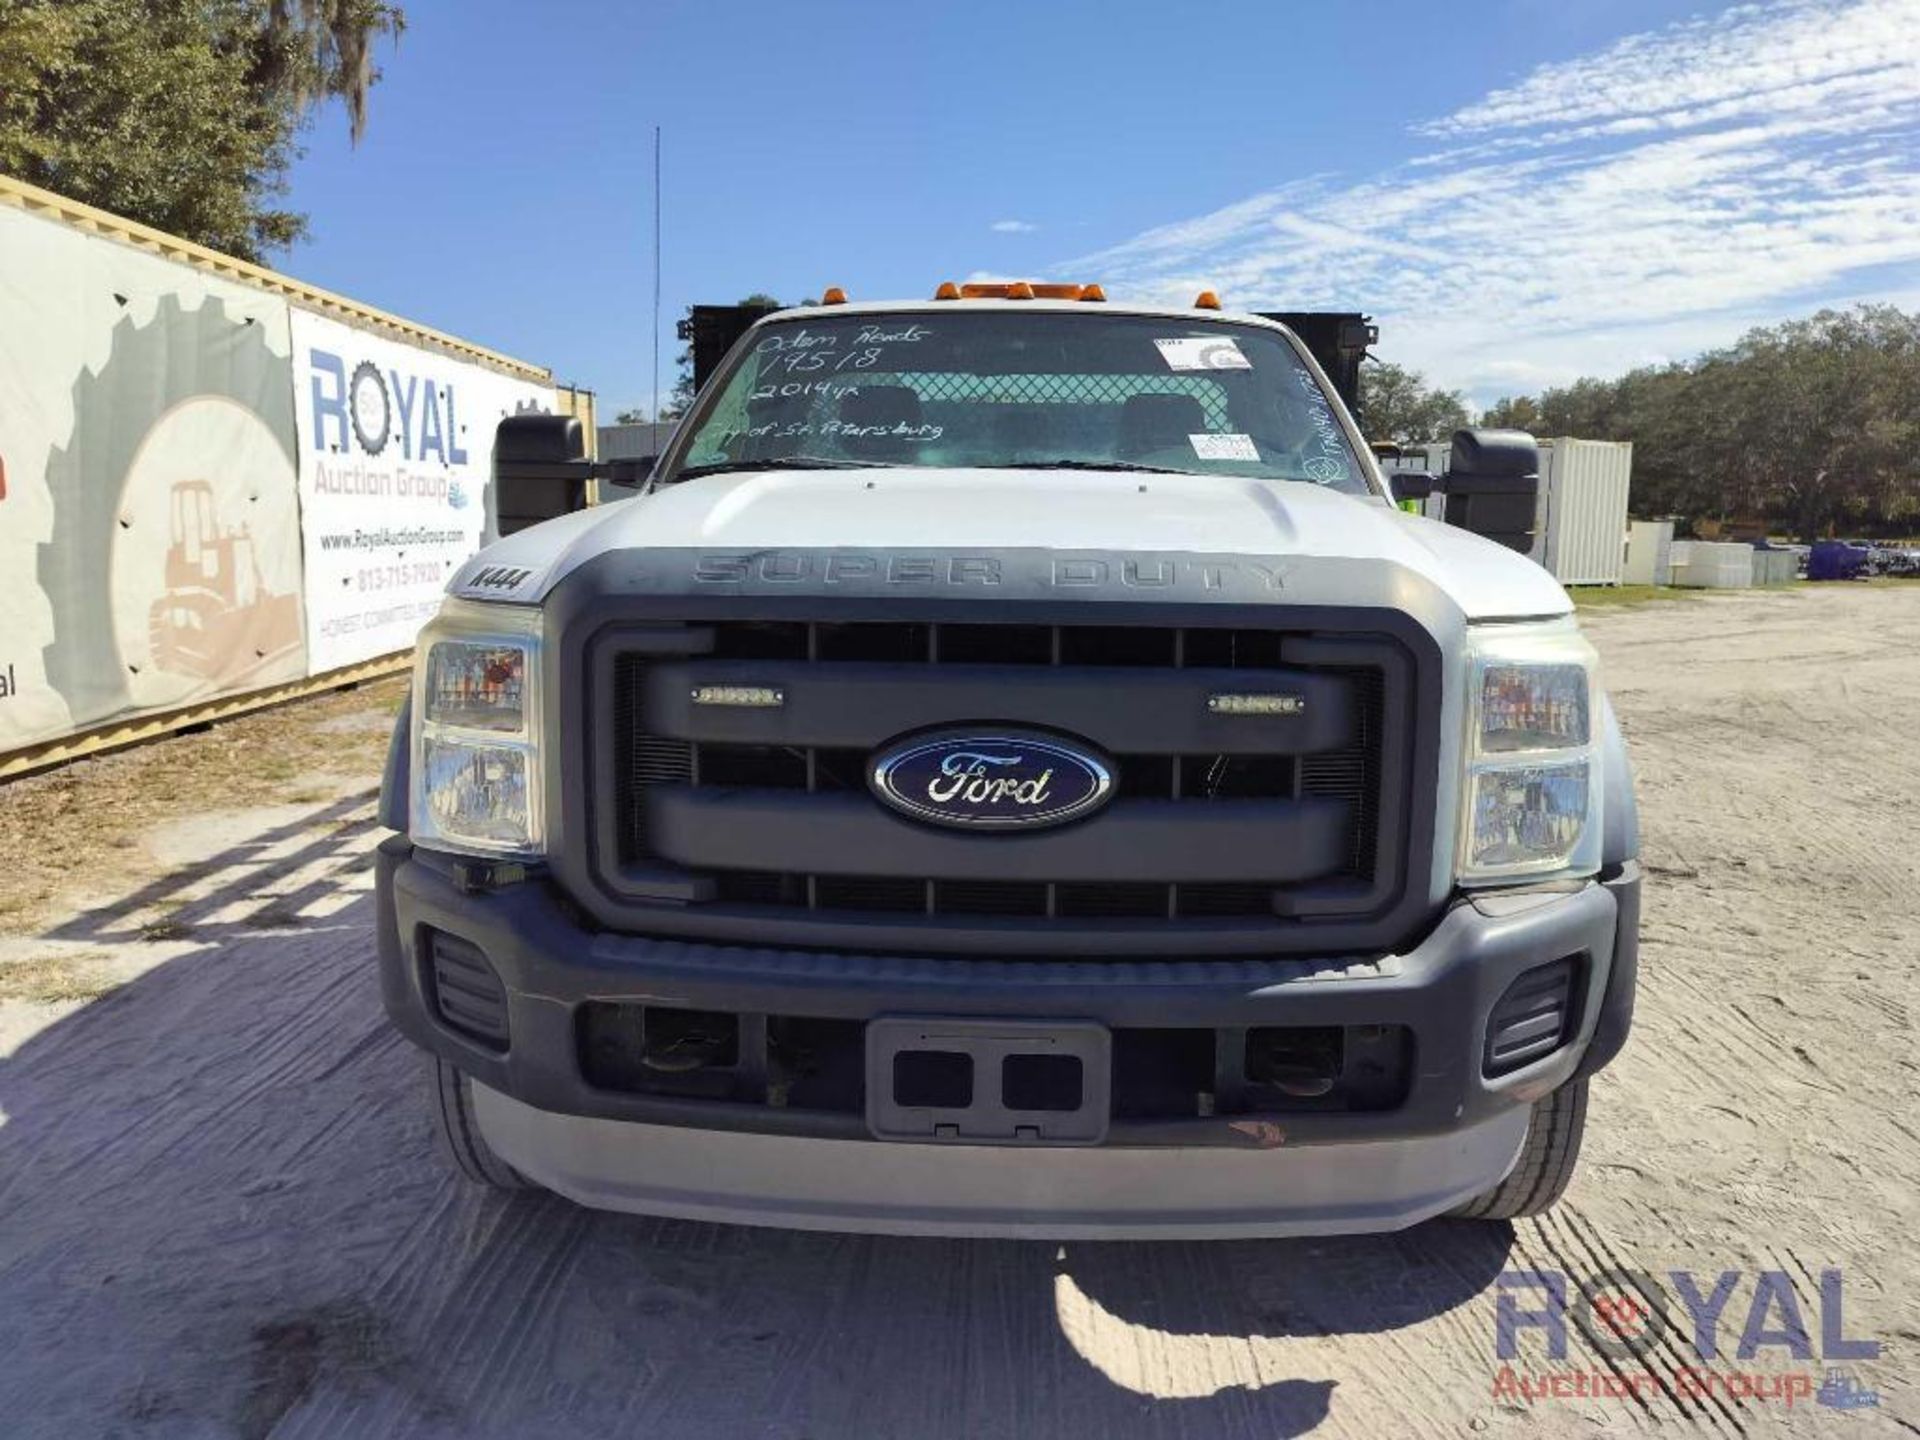 2014 Ford F550 Stakebody Flatbed Truck - Image 10 of 29